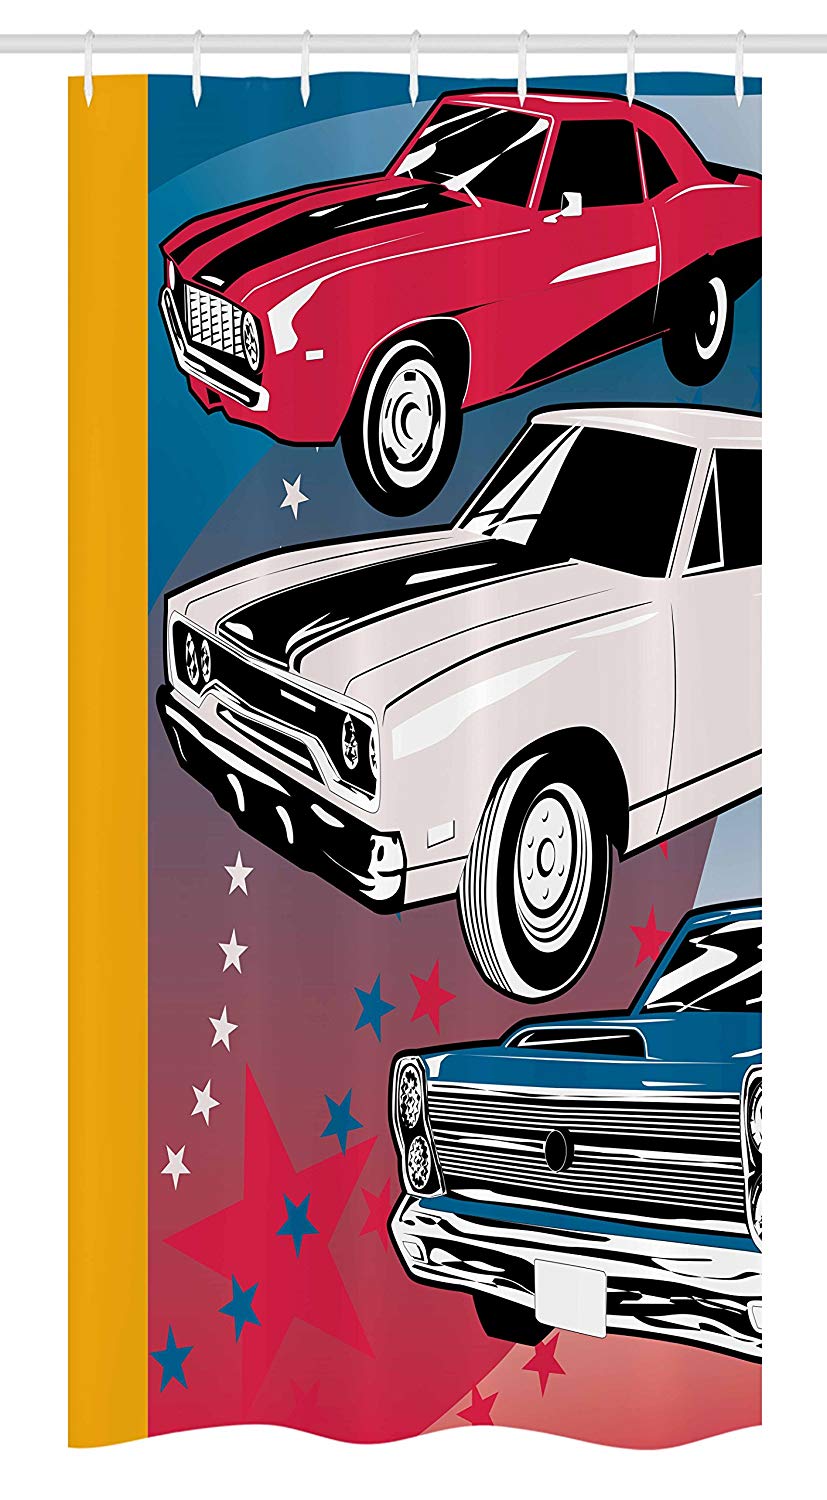 Ambesonne Cars Stall Shower Curtain, Pop Art Stylized Group of Nostalgic American Muscle Cars with Stars Antique Print, Fabric Bathroom Decor Set with Hooks, 36 W x 72 L inches, Red Beige Blue